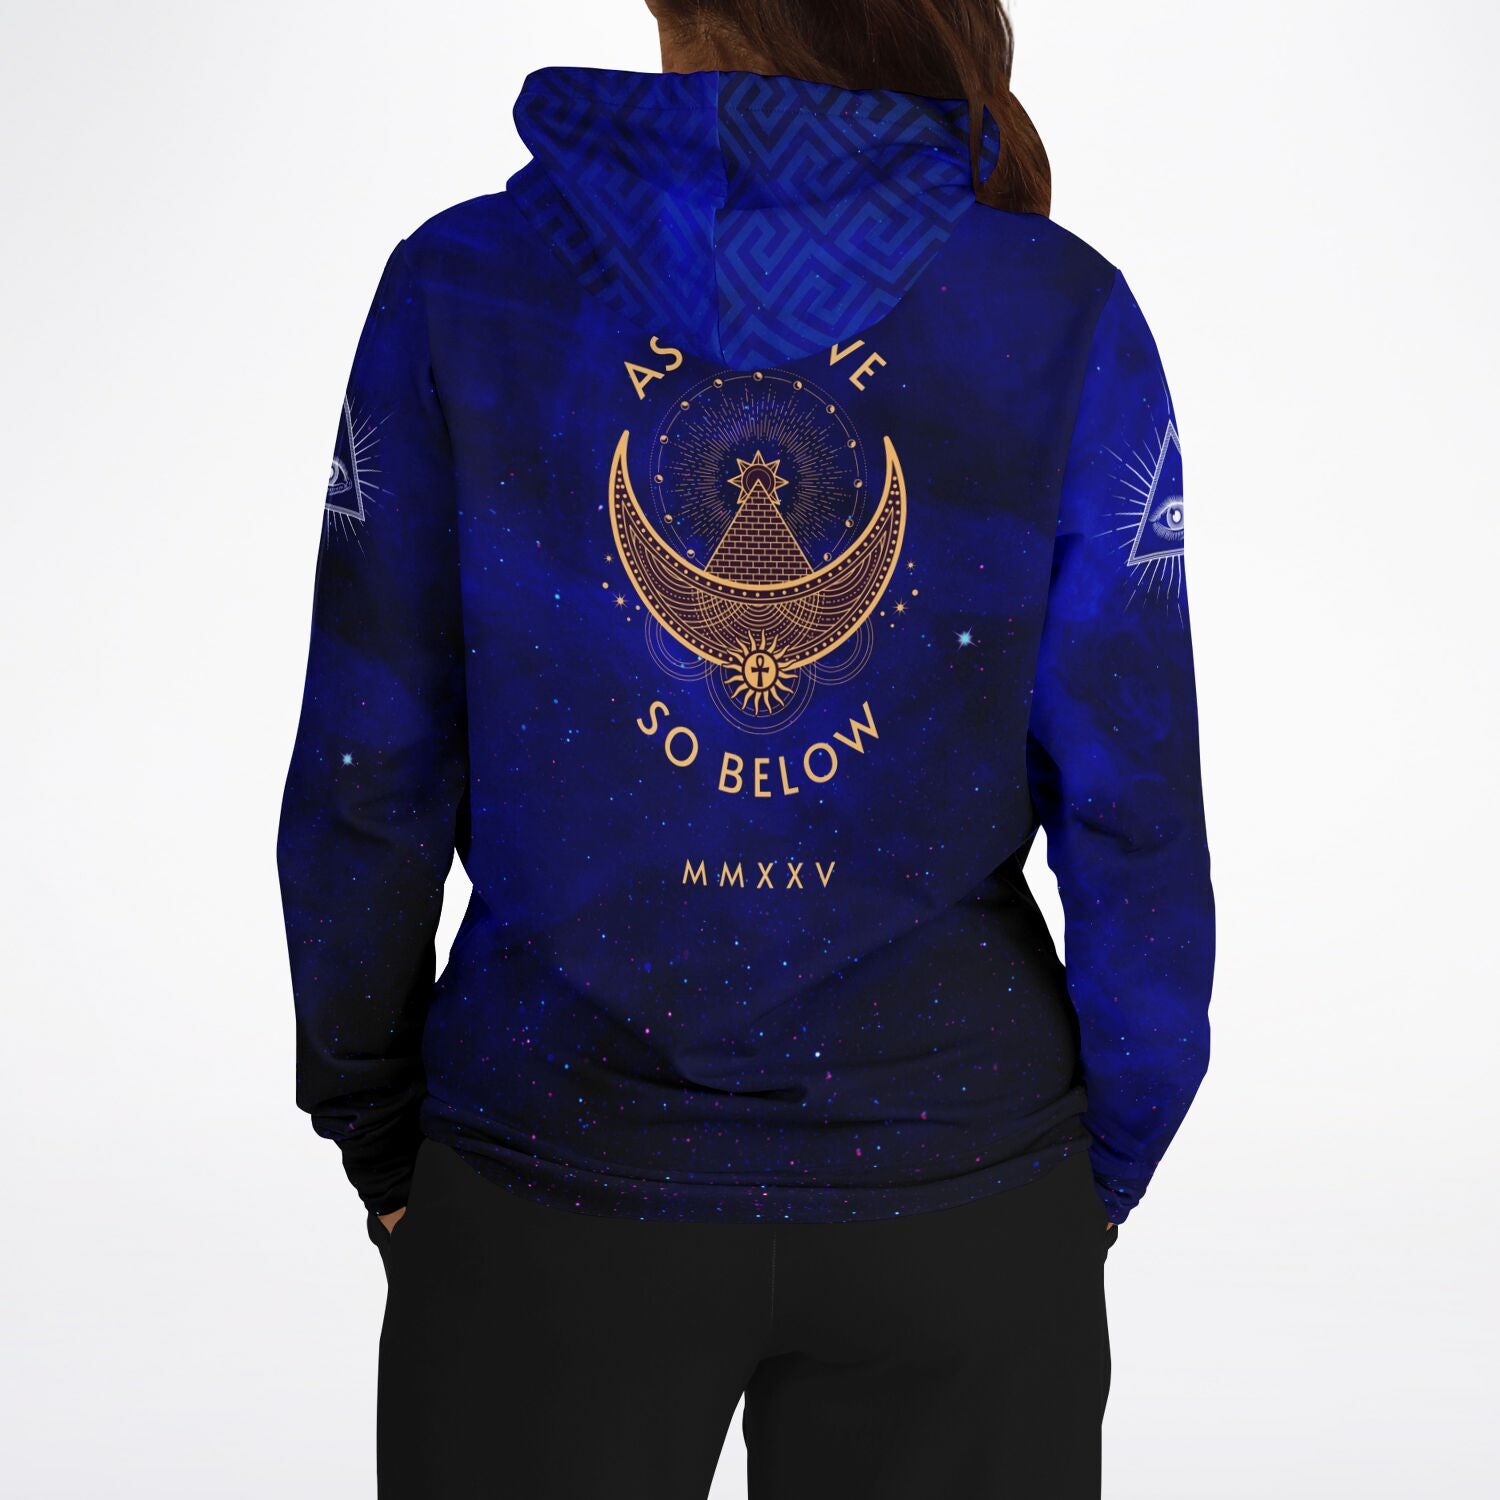 Elivior's trendy hoodie features a crescent moon alongside the Eye of Providence, incorporating Illuminati and Masonic symbols. This celebrity streetwear piece is sure to make a statement.